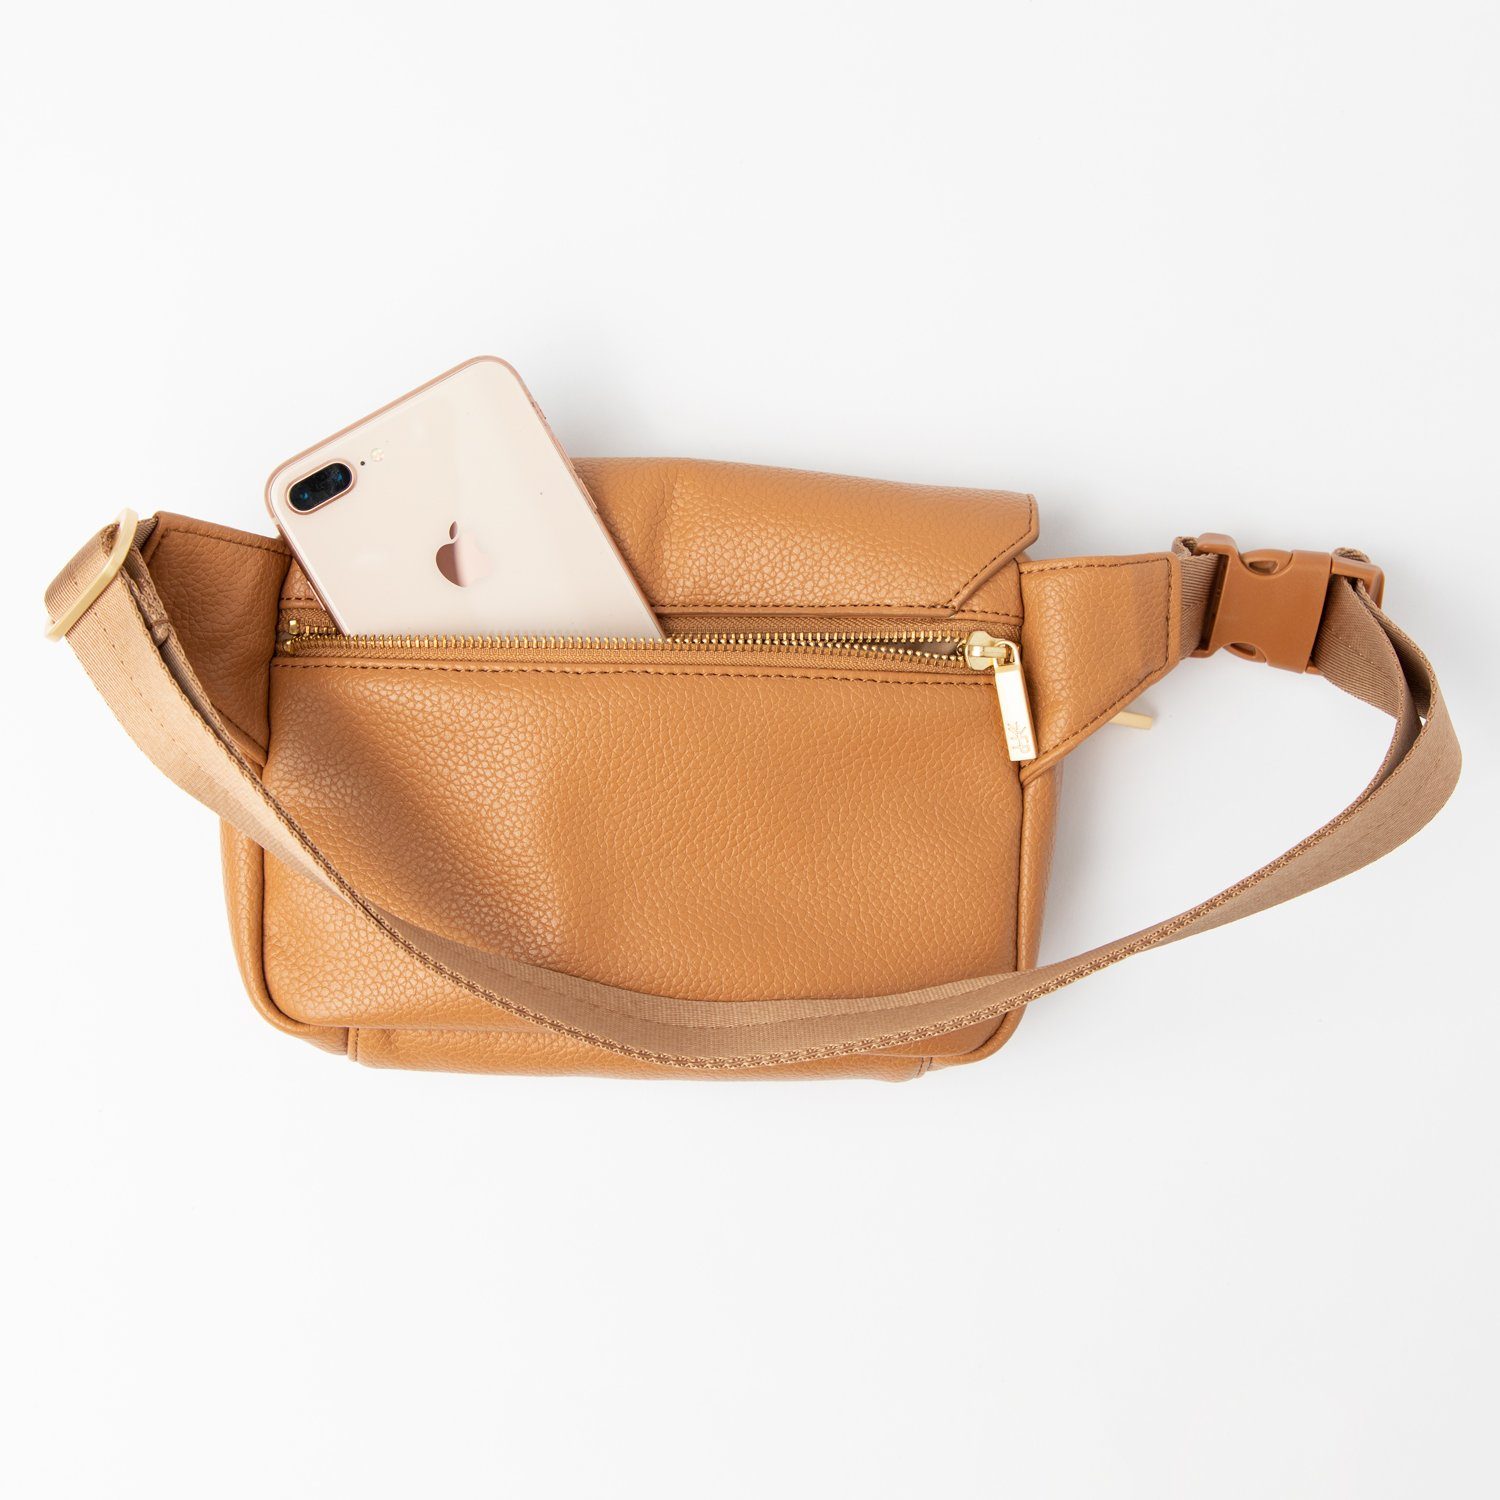 Tan Bum Bag Fanny Pack Leather Fanny Bag Smooth Leather 